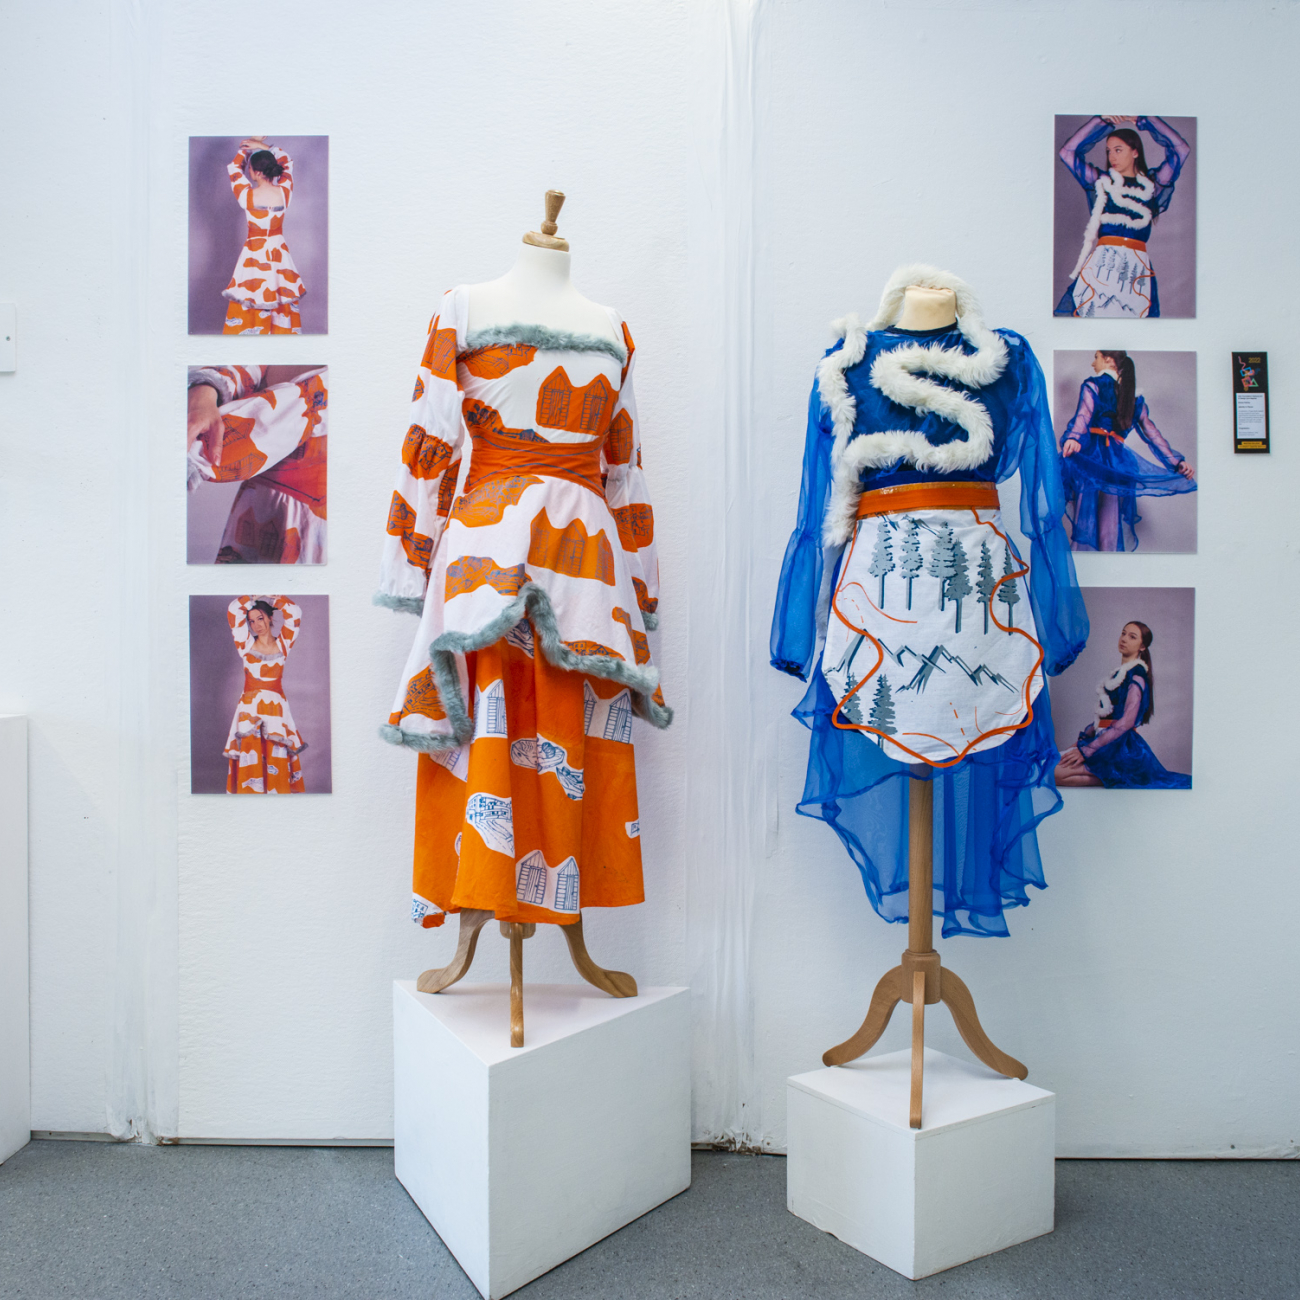 Students work on show in art exhibition at the summer show. One orange dress and one blue dress with fur trim on mannequins with photographs of a model wearing the garments on the wall behind